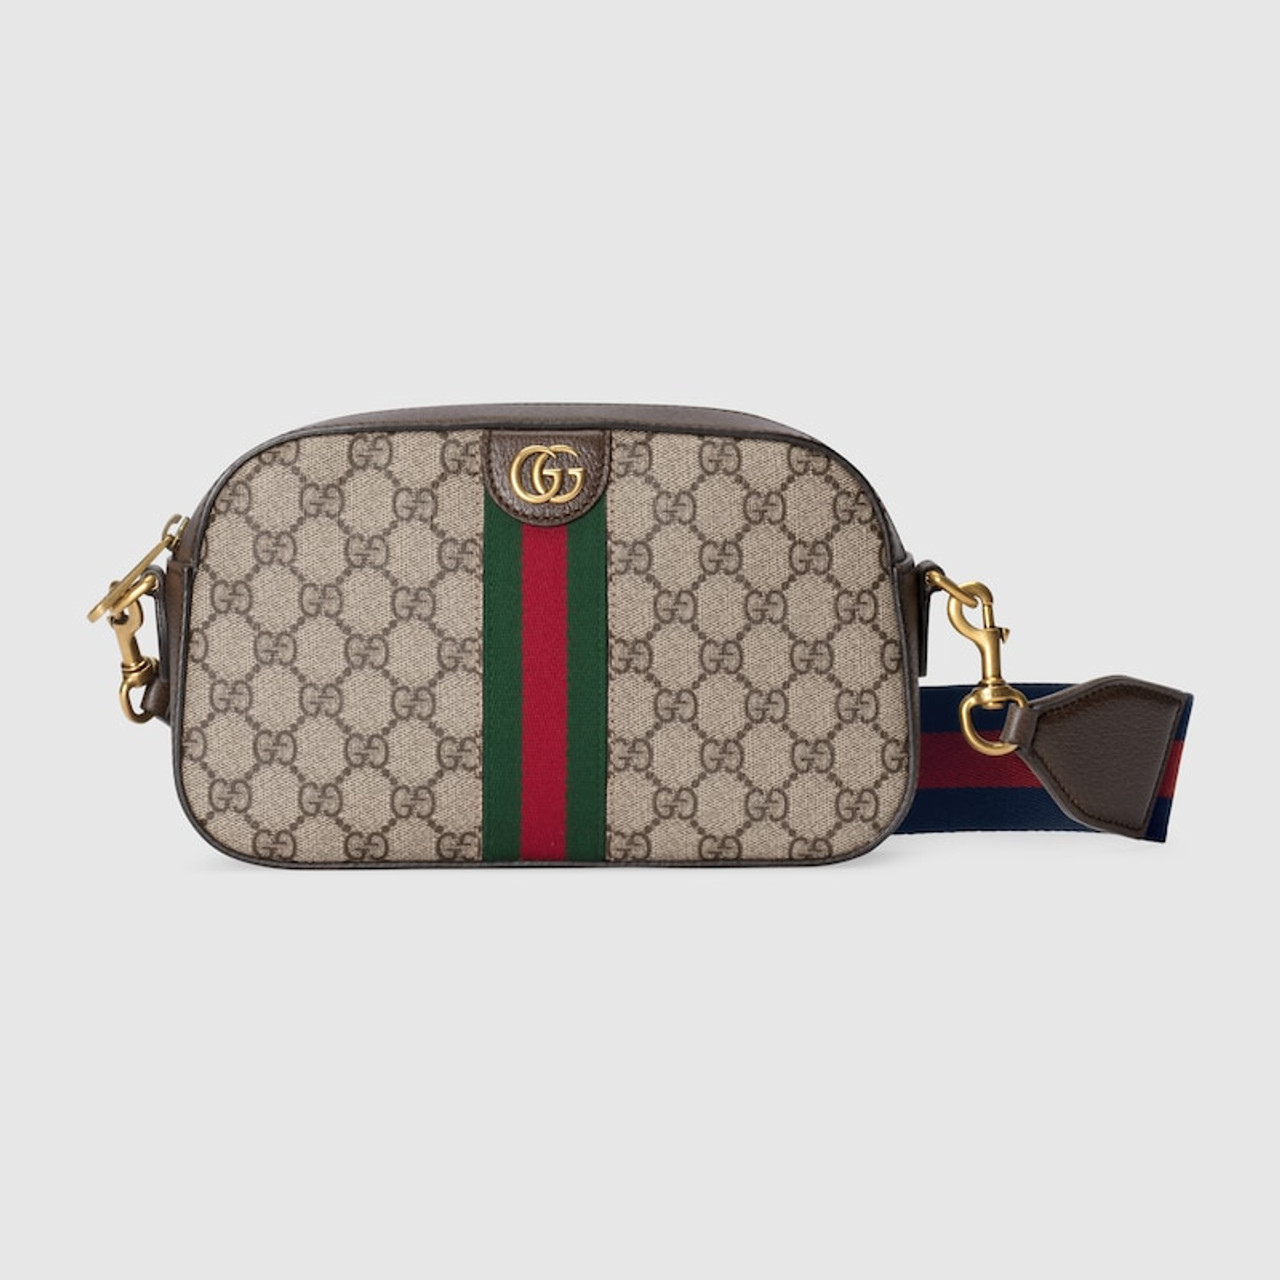 Gucci - A new tote bag from the Gucci Cruise 2019 collection, featuring a  roaring tiger hardware inspired by a vintage Hattie Carnegie jewelry  design, is constructed with pockets to store the